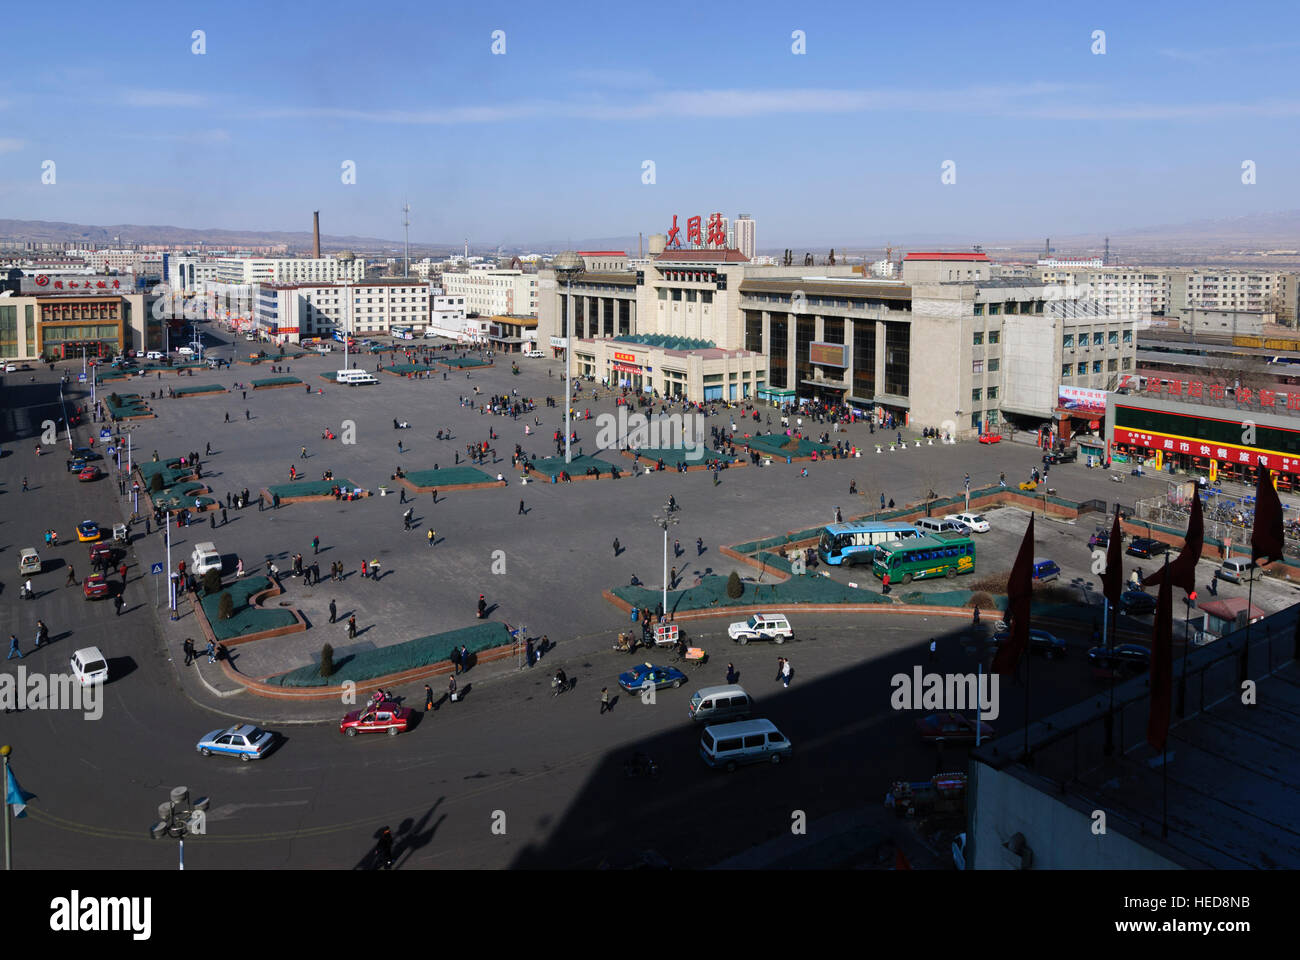 Datong : gare, Shanxi, Chine Banque D'Images